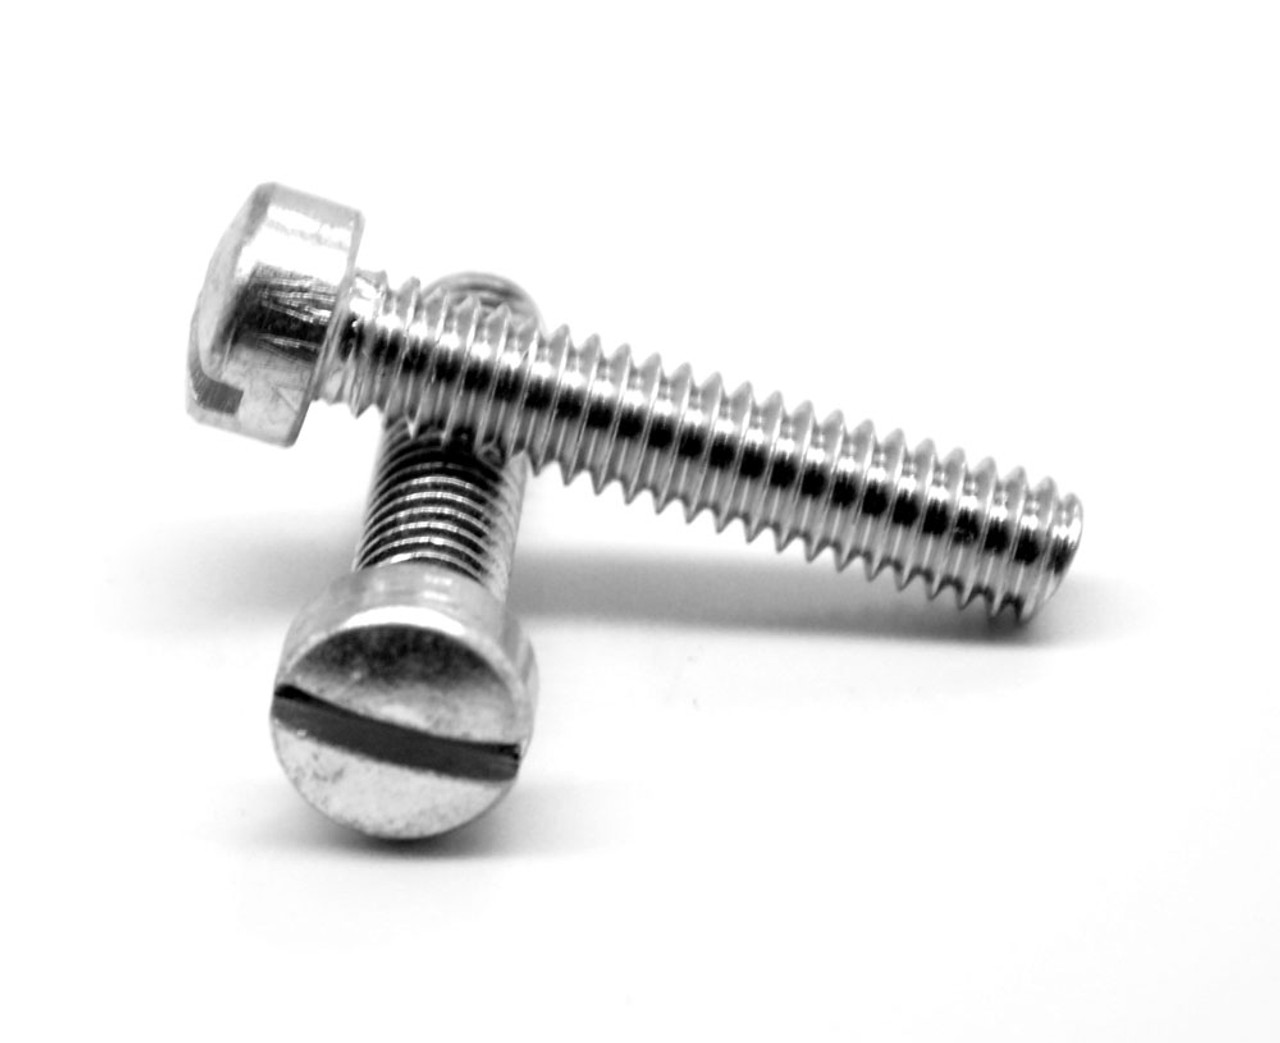 #10-32 x 3/8" (FT) Fine Thread Machine Screw Slotted Fillister Head Stainless Steel 18-8